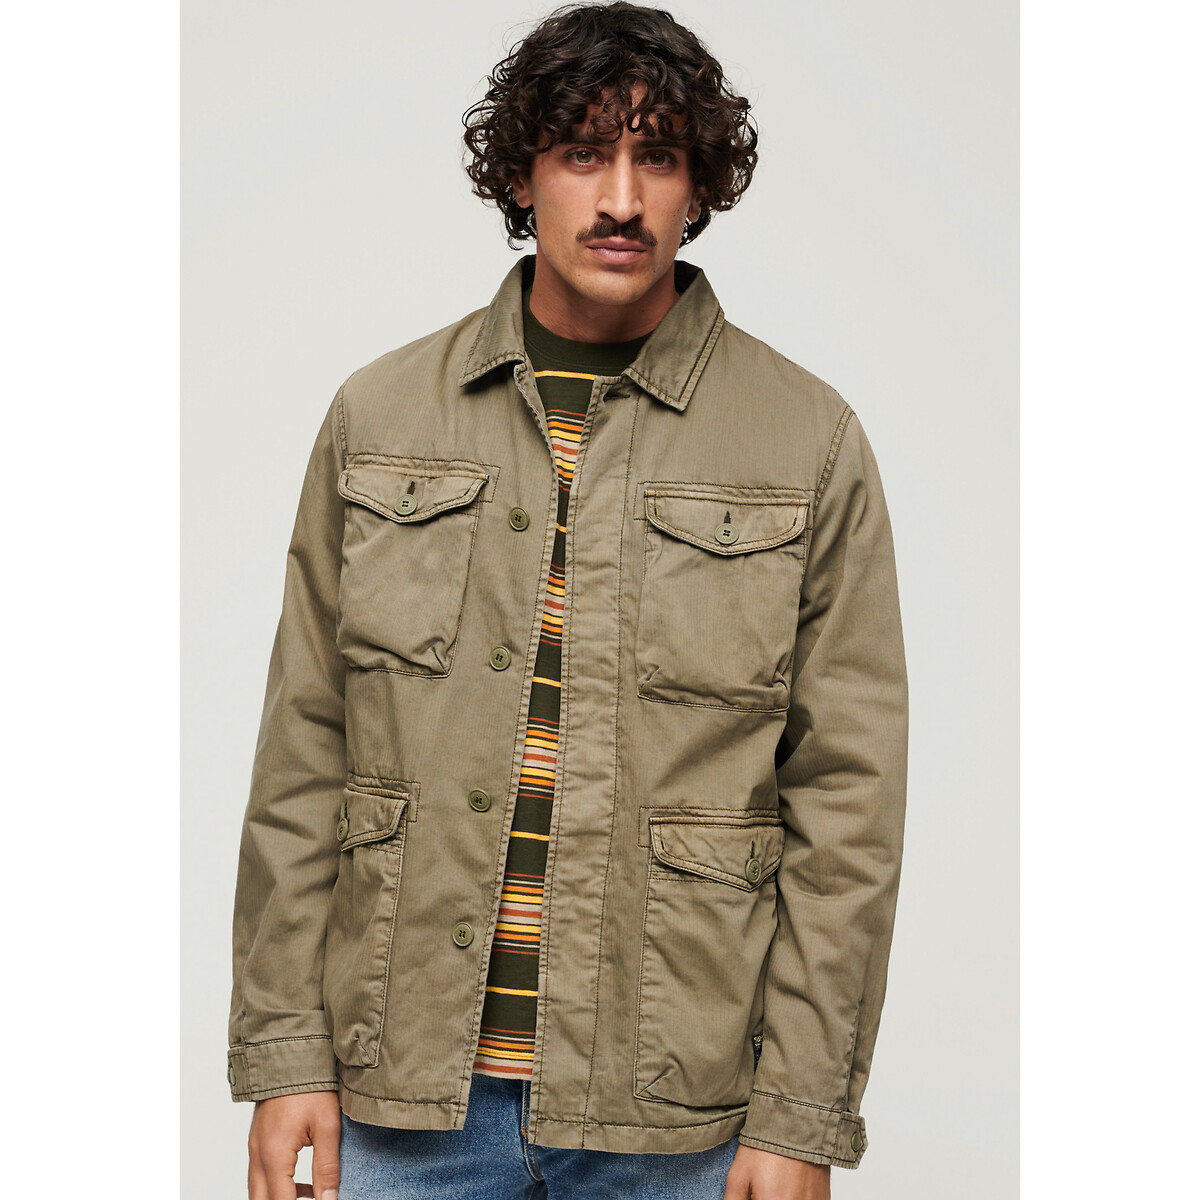 Image of M65 Military Utility Jacket in Cotton